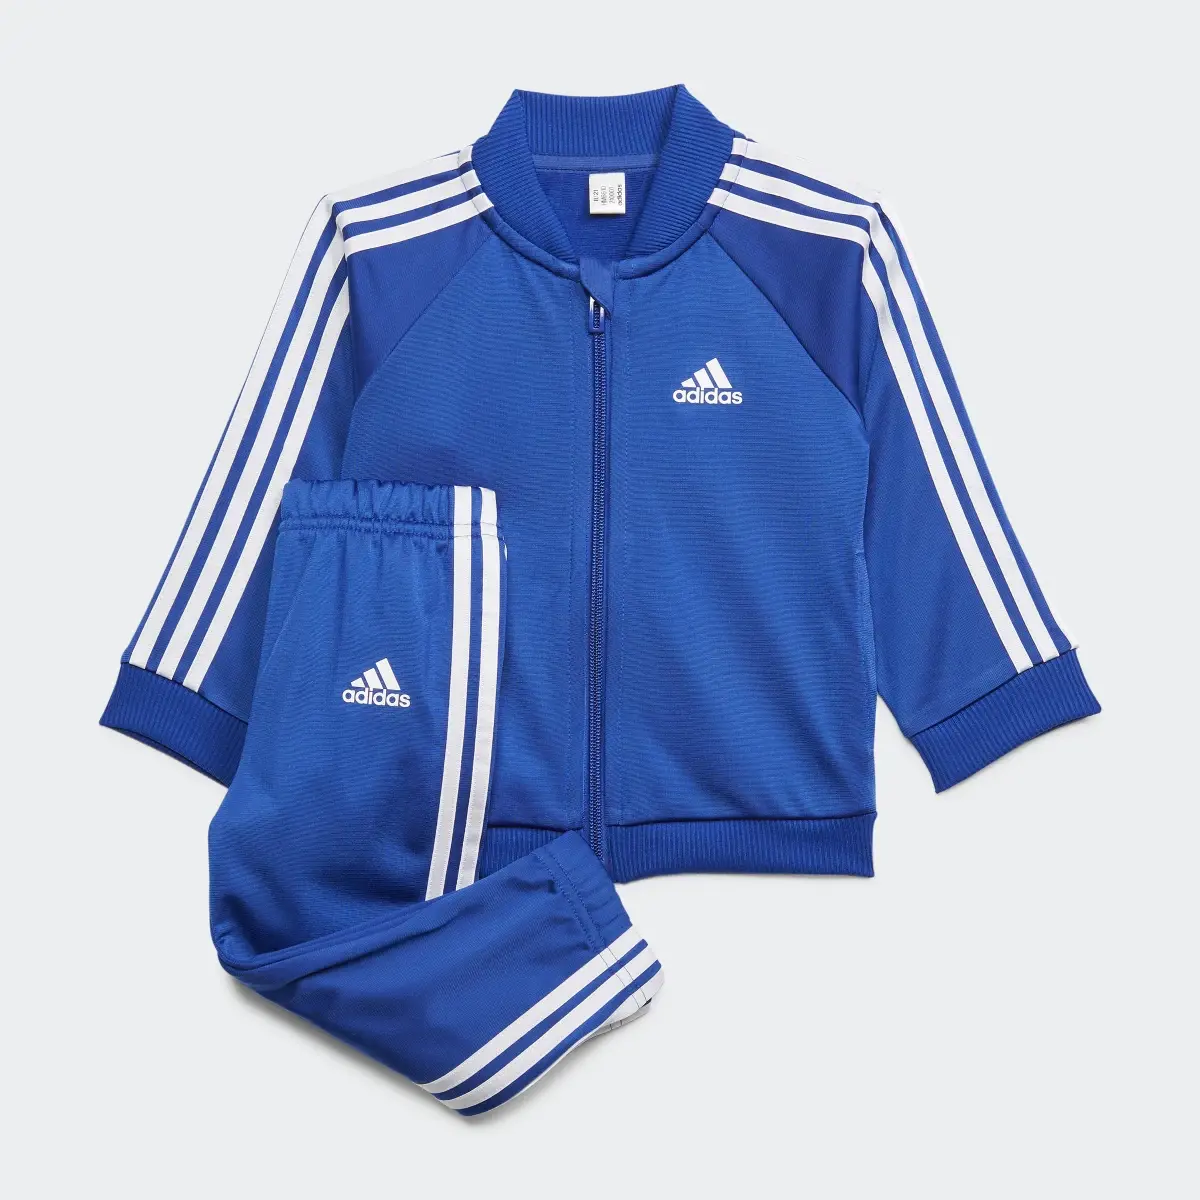 Adidas 3-Stripes Tricot Track Suit. 2